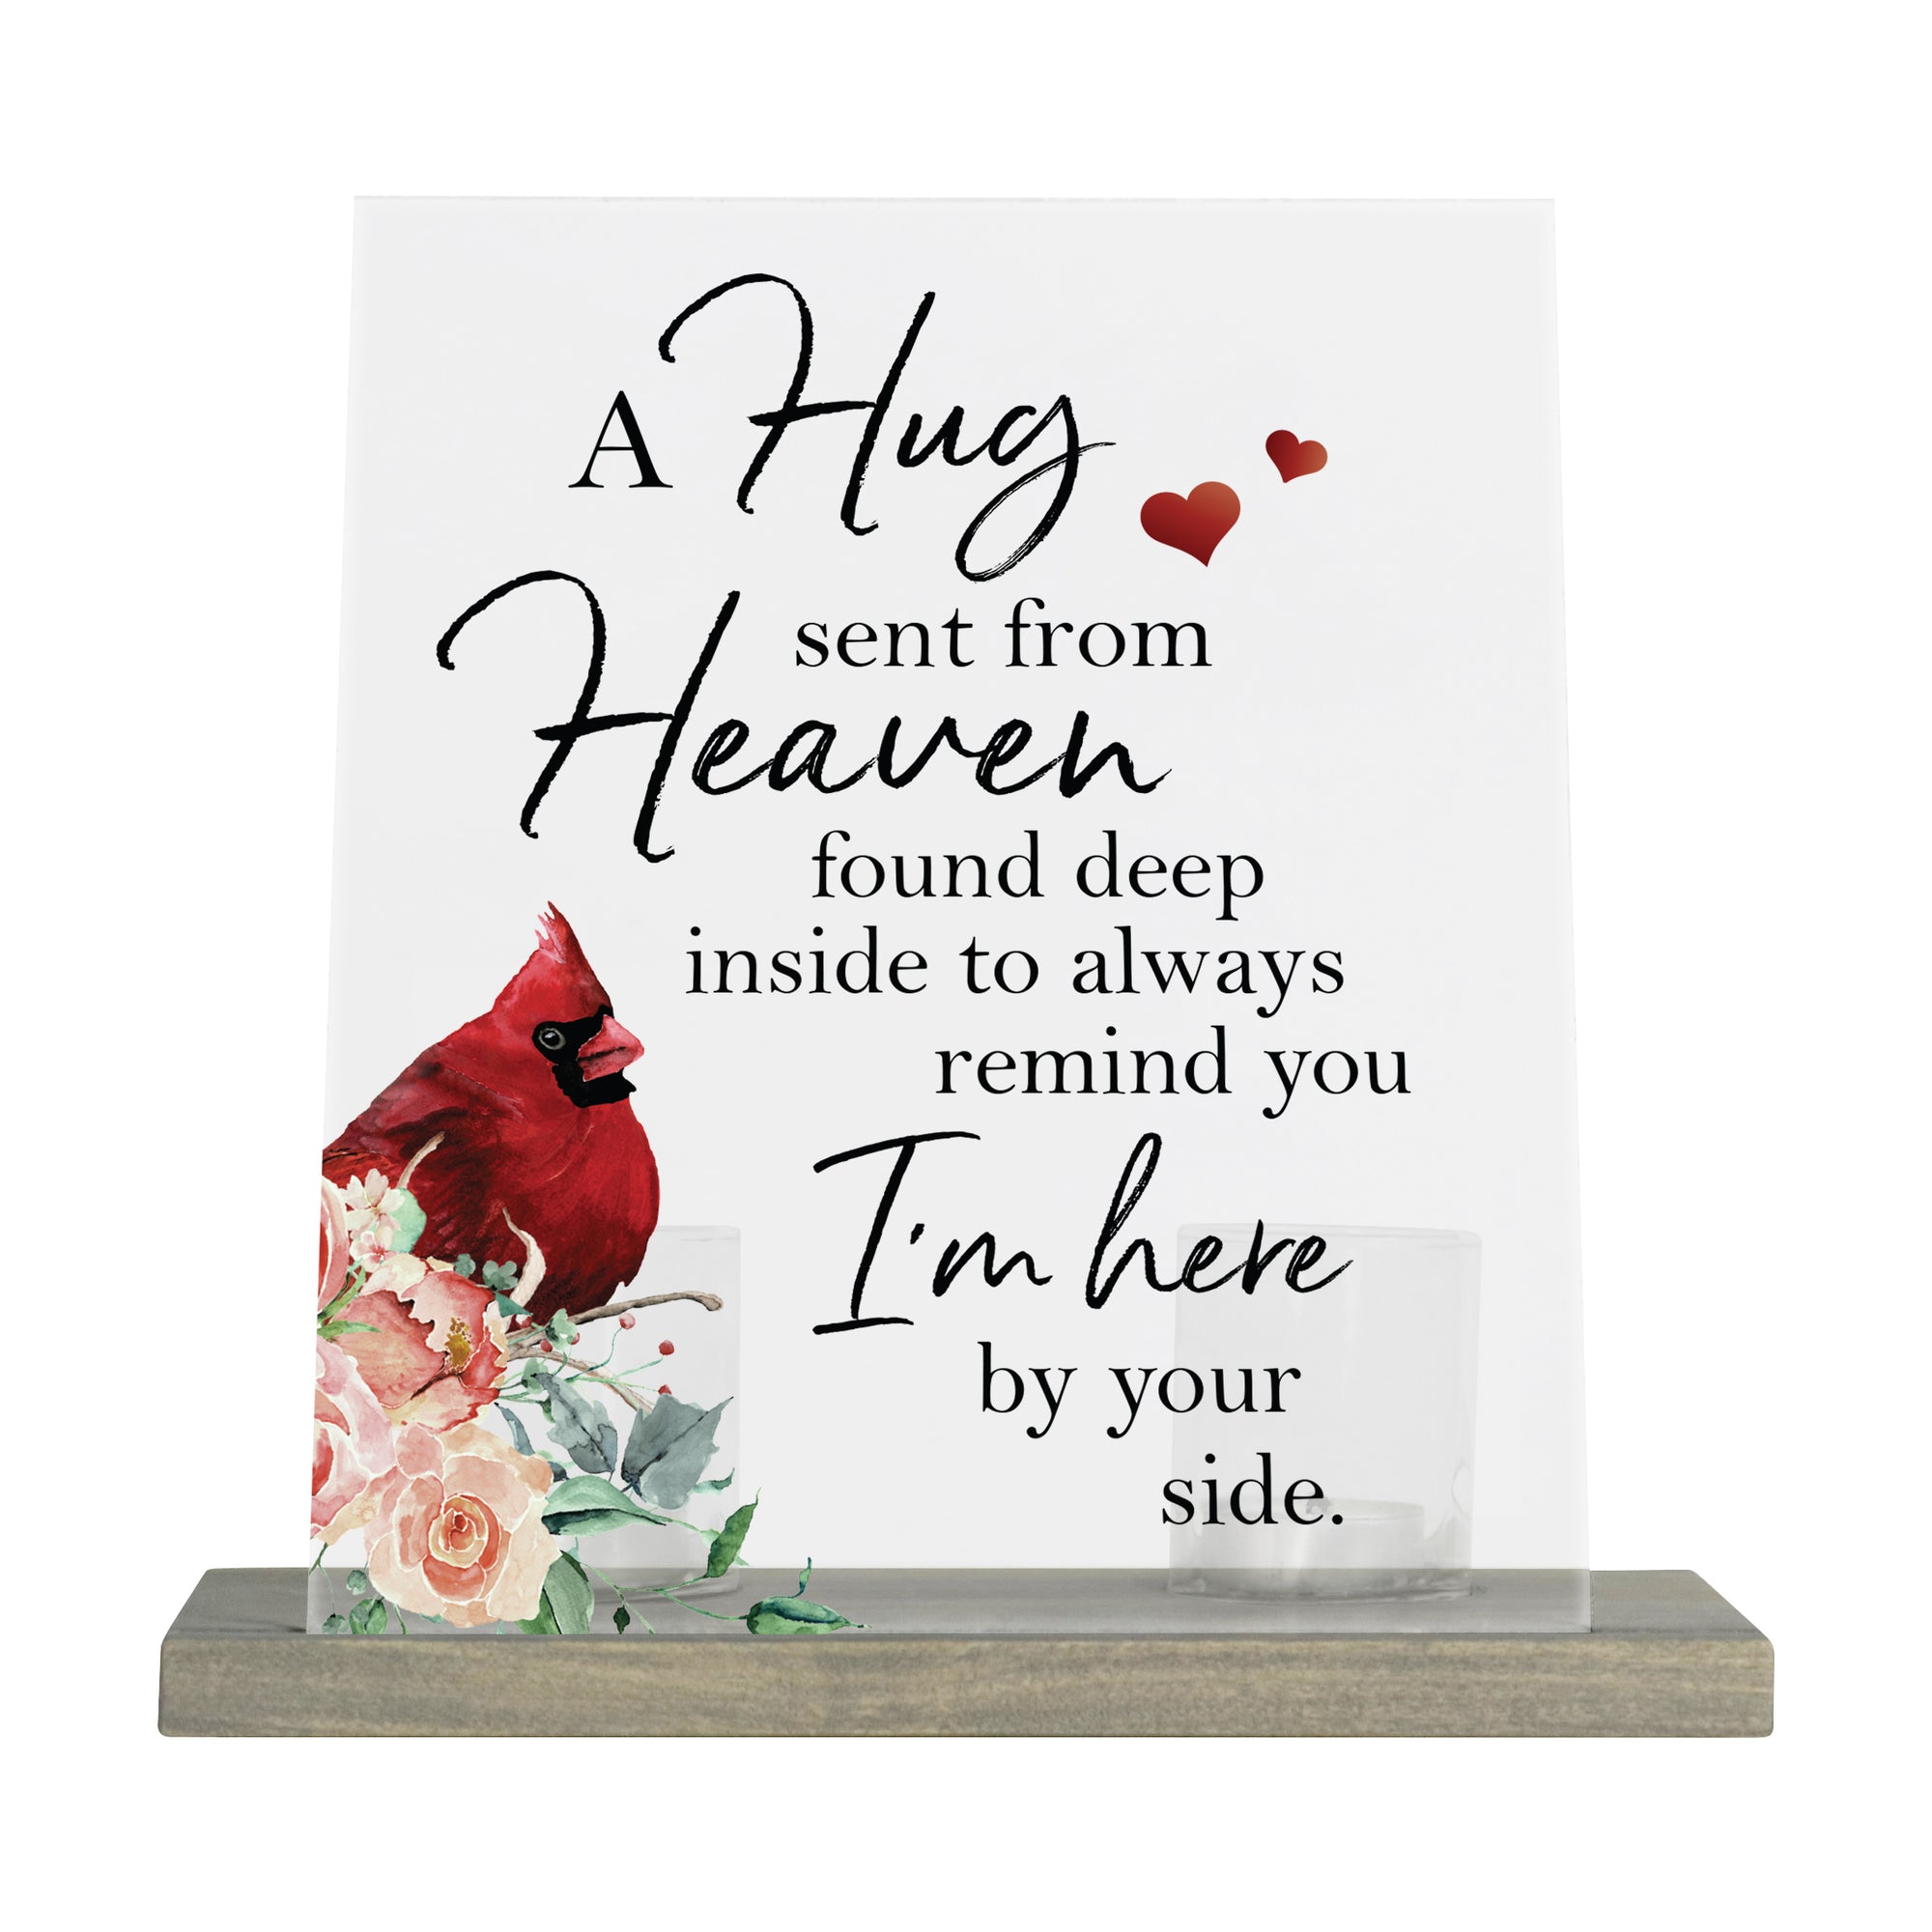 LifeSong Memorials Vintage Memorial Cardinal Acrylic Sign Candle Holder With Wood Base And Glass Votives For Home Decor | A Hug Sent From Heaven. Living Room, Bedroom, Kitchen, Dining Room, and Entryways perfect memorial bereavement keepsake gift ideas for Family & Friends.